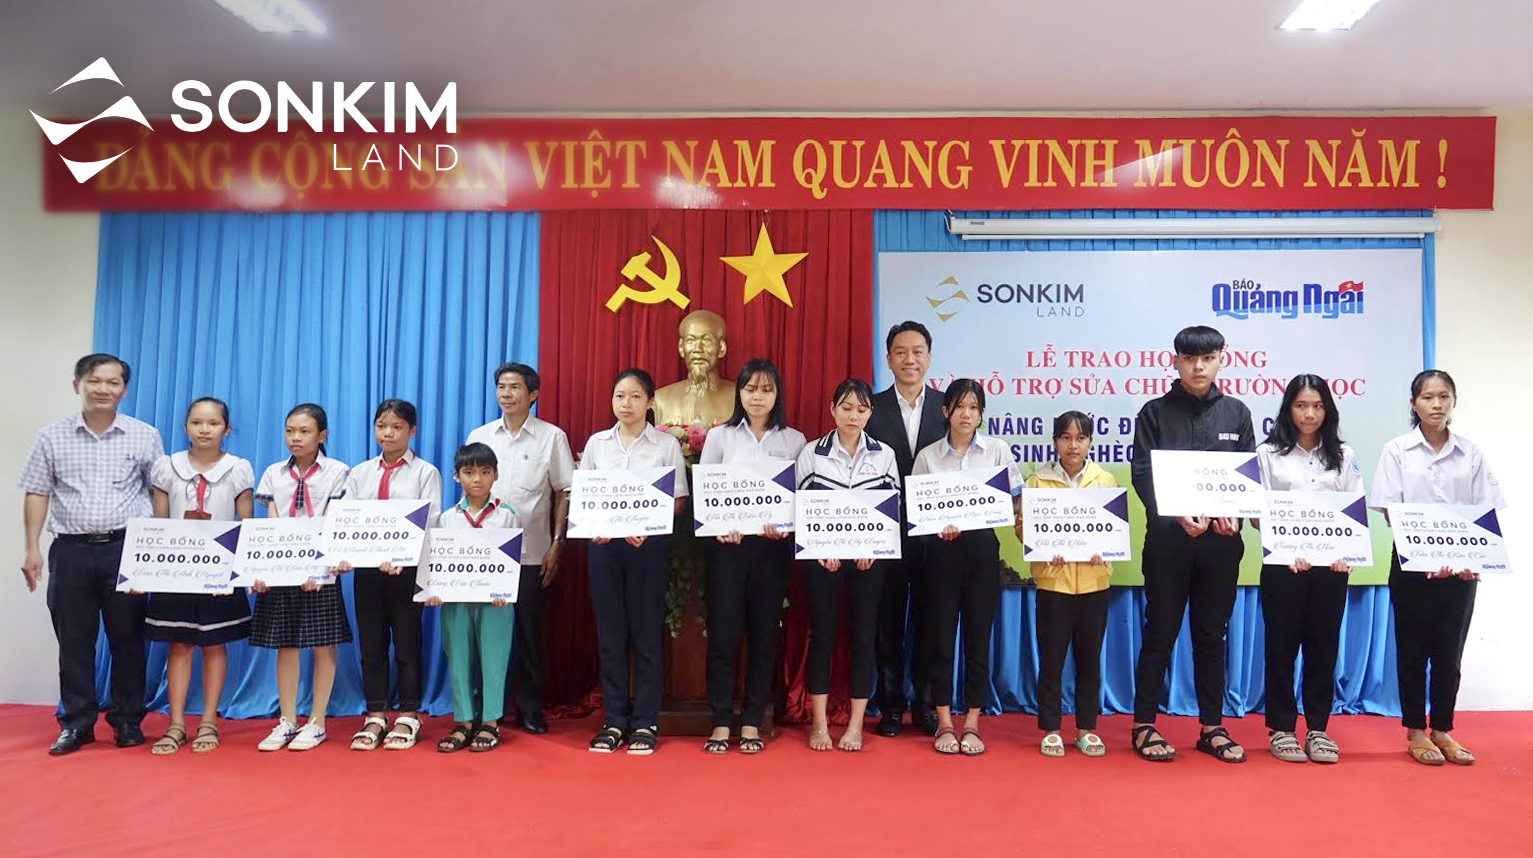 SonKim Land continues to support poor students in Quang Ngai provinces